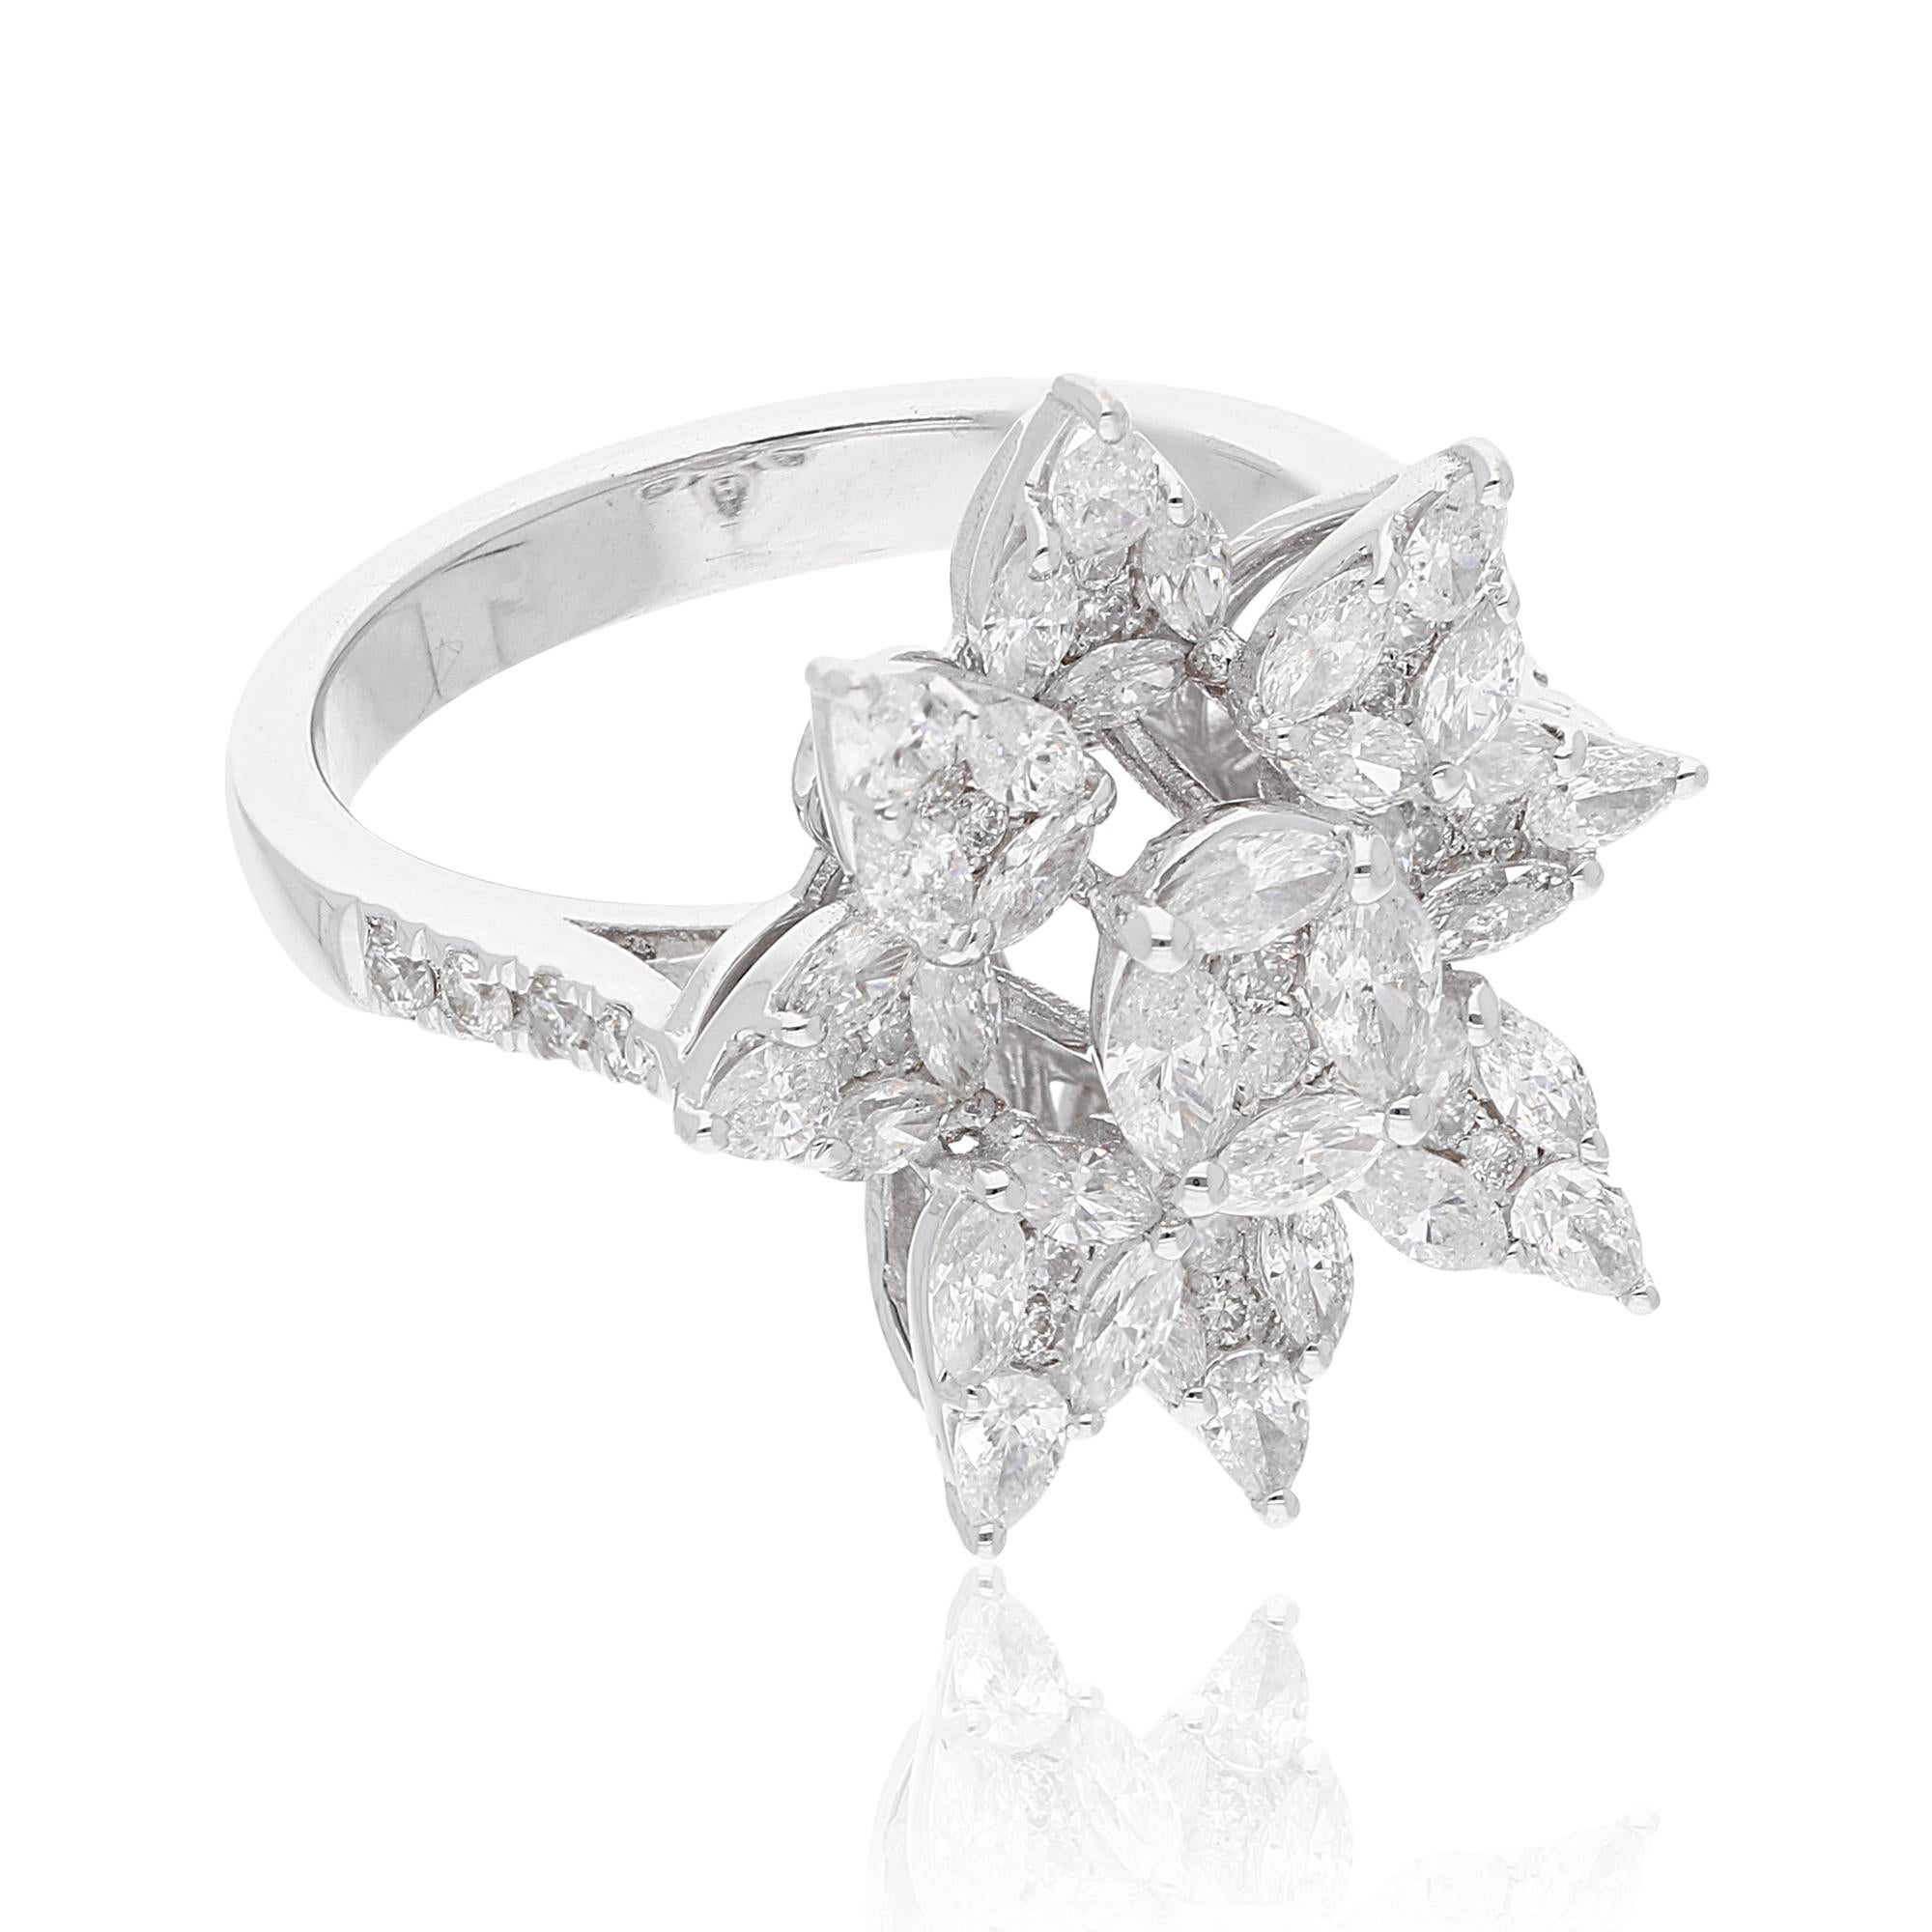 Indulge in the luxurious allure of this exquisite ring and let it become a symbol of your unique style and grace. With its natural diamonds, fine white gold craftsmanship, and stunning floral design, it is more than just a ring—it is a wearable work